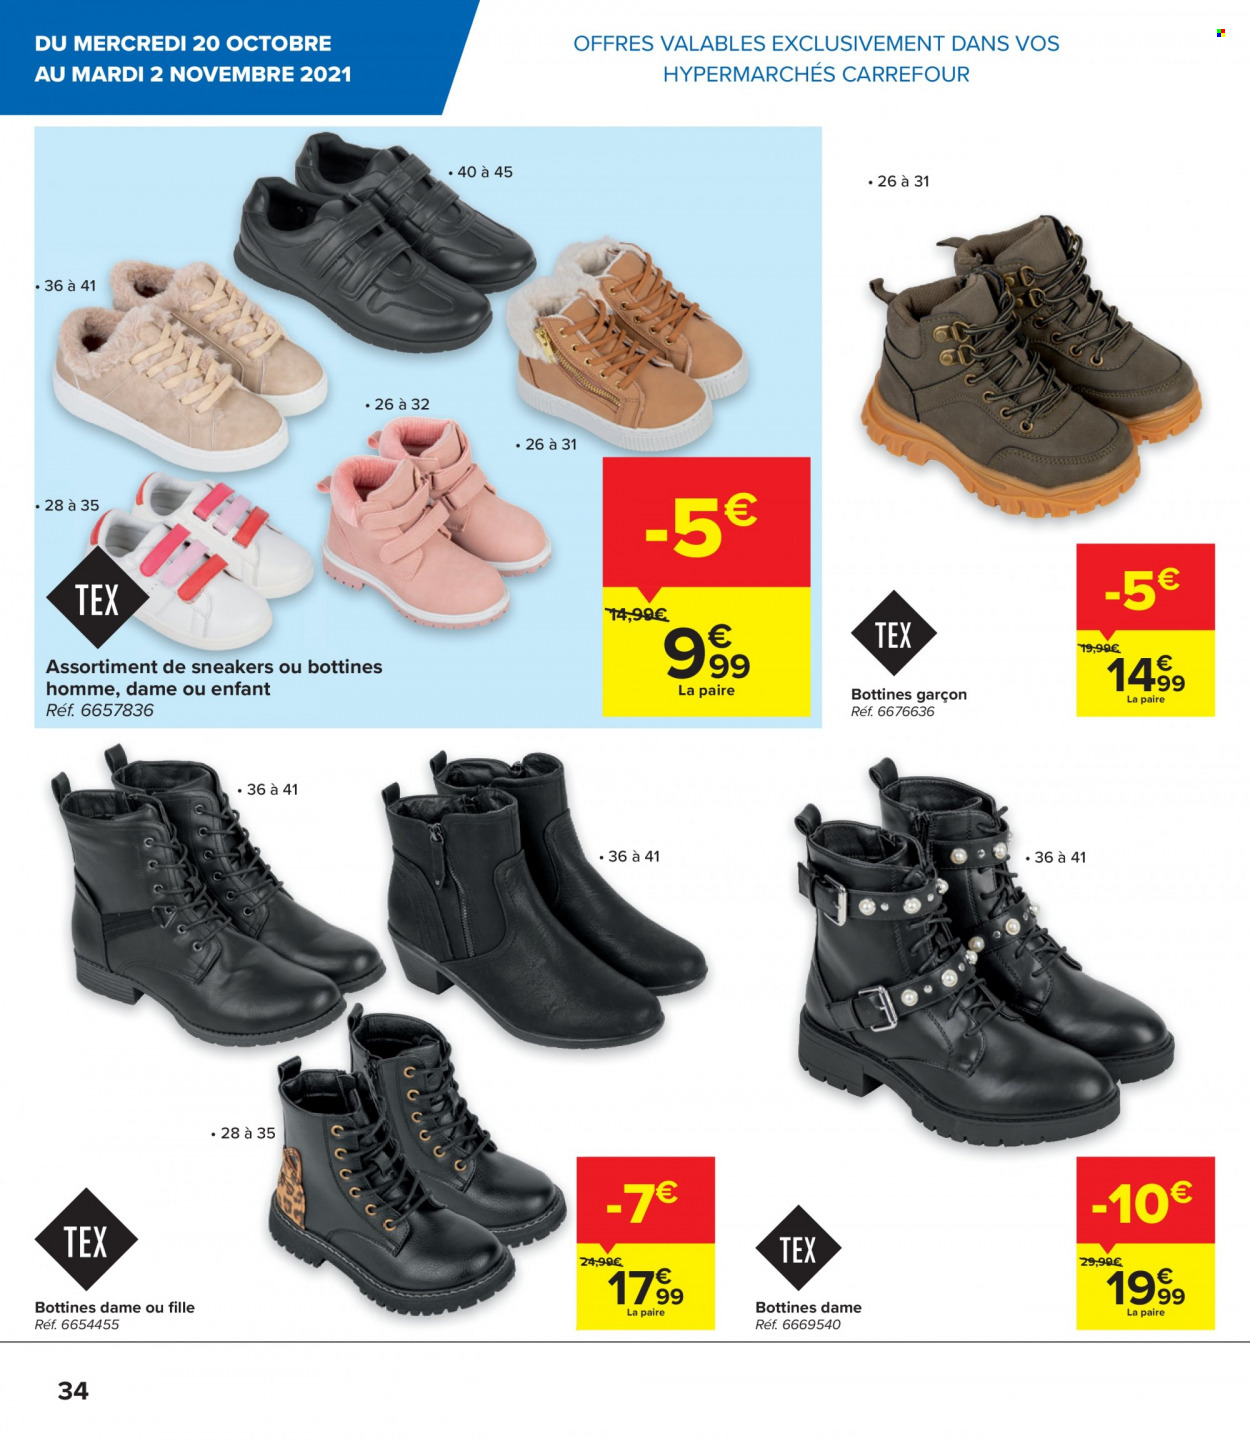 Catalogue Carrefour hypermarkt - 20.10.2021 - 2.11.2021. Page 10.